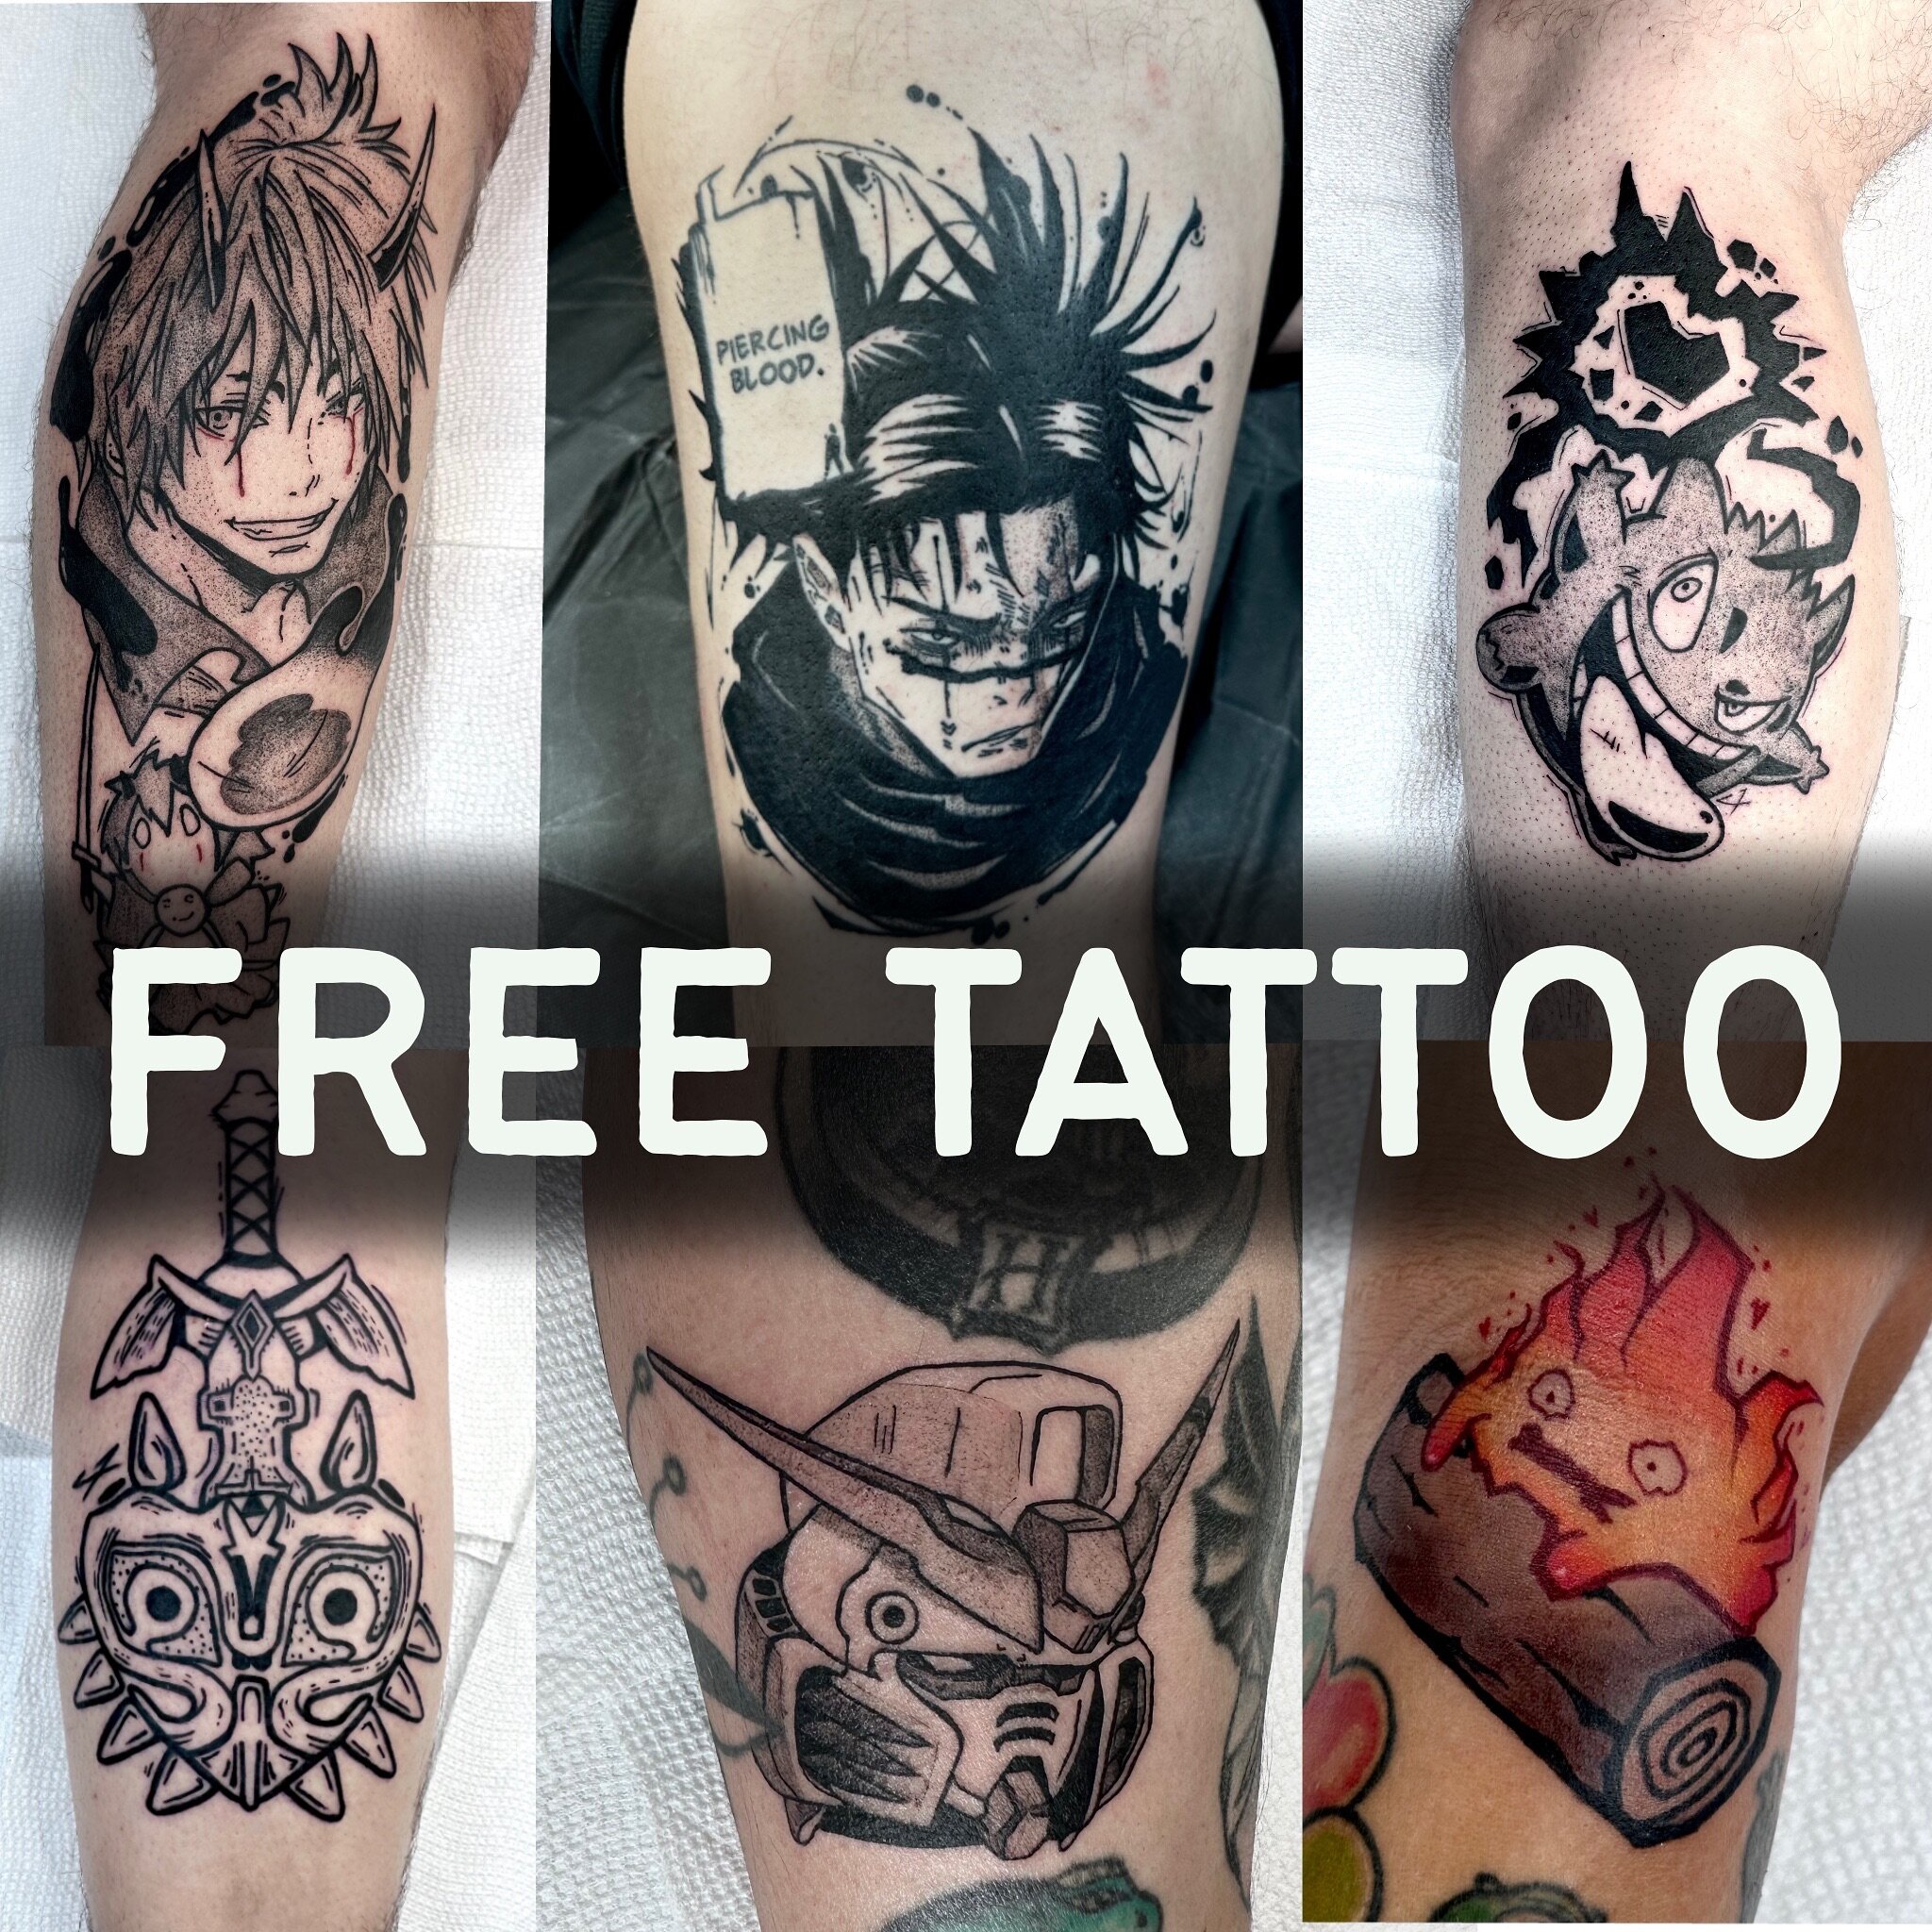 about to hit 1,000 followers! i&rsquo;ve met so many awesome people since i&rsquo;ve started tattooing, so to thank you all i&rsquo;m giving away a FREE tattoo! I&rsquo;m down to do anime, comic book, video game, animals, floral, in black and grey or